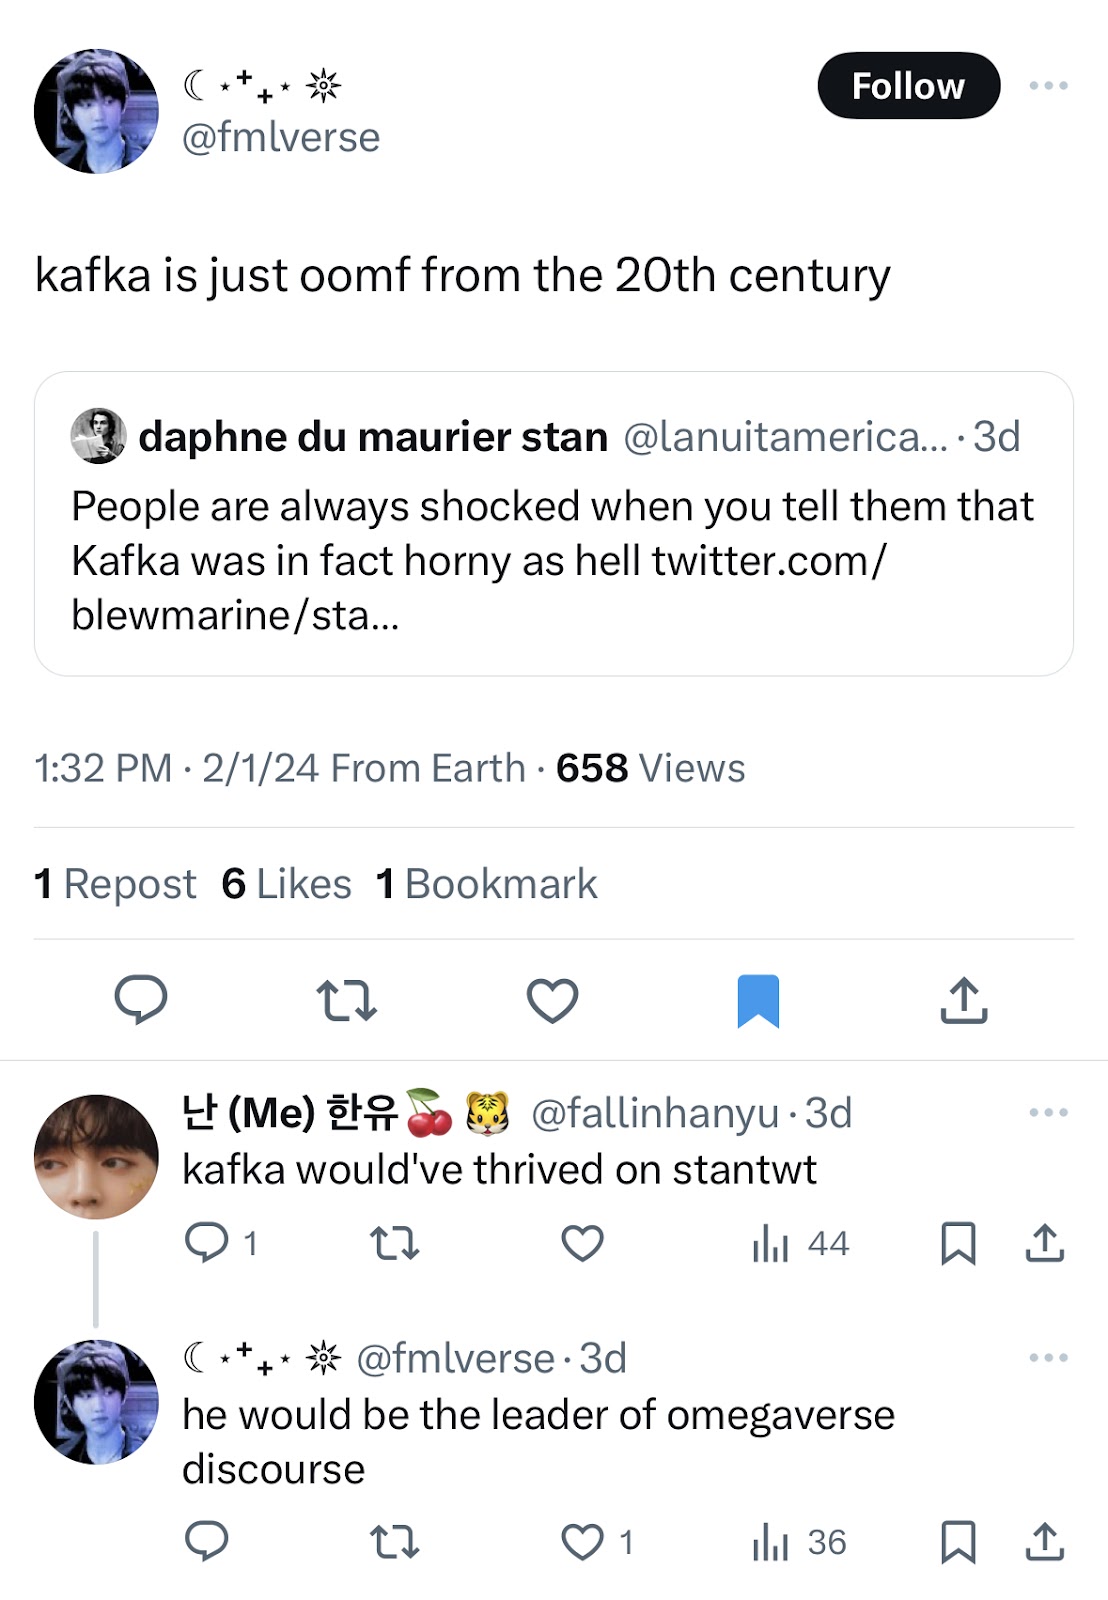 Twitter thread that starts with a quote of a tweet reading “People are always shocked when you tell them that Kafka was in fact horny as hell.” The poster, @fmlverse, added: “kafka is just oomf from the 20th century.” One reply reads “kafka would've thrived on stantwt” and another, “he would be the leader of omegaverse discourse”